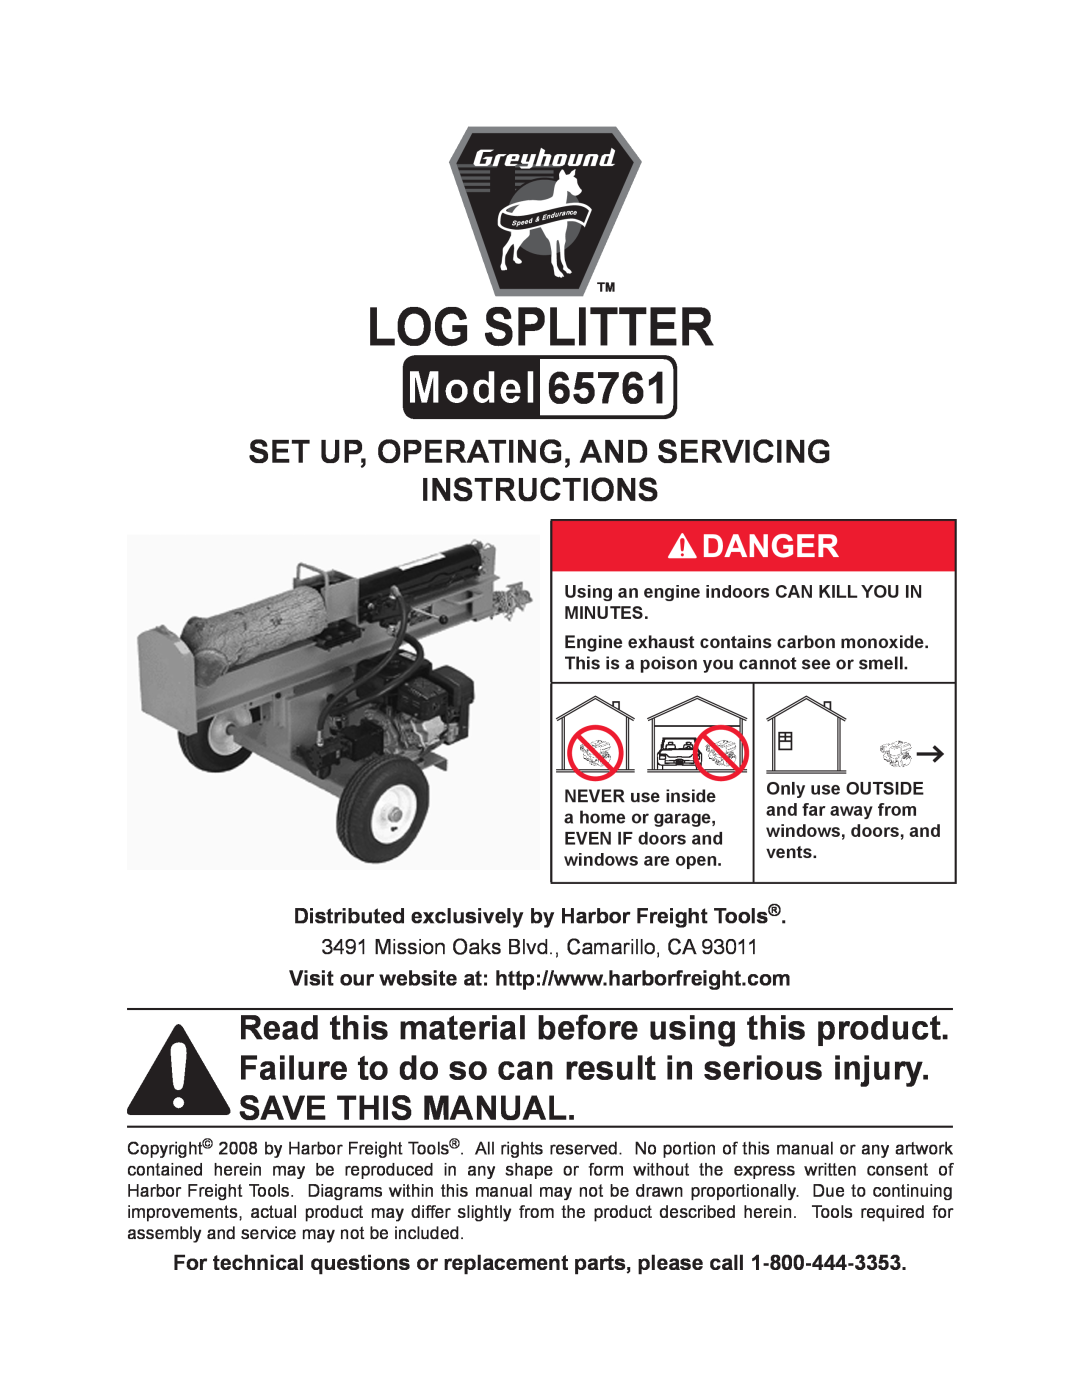 Harbor Freight Tools 65761 manual Log splitter, Set up, Operating, and Servicing Instructions 